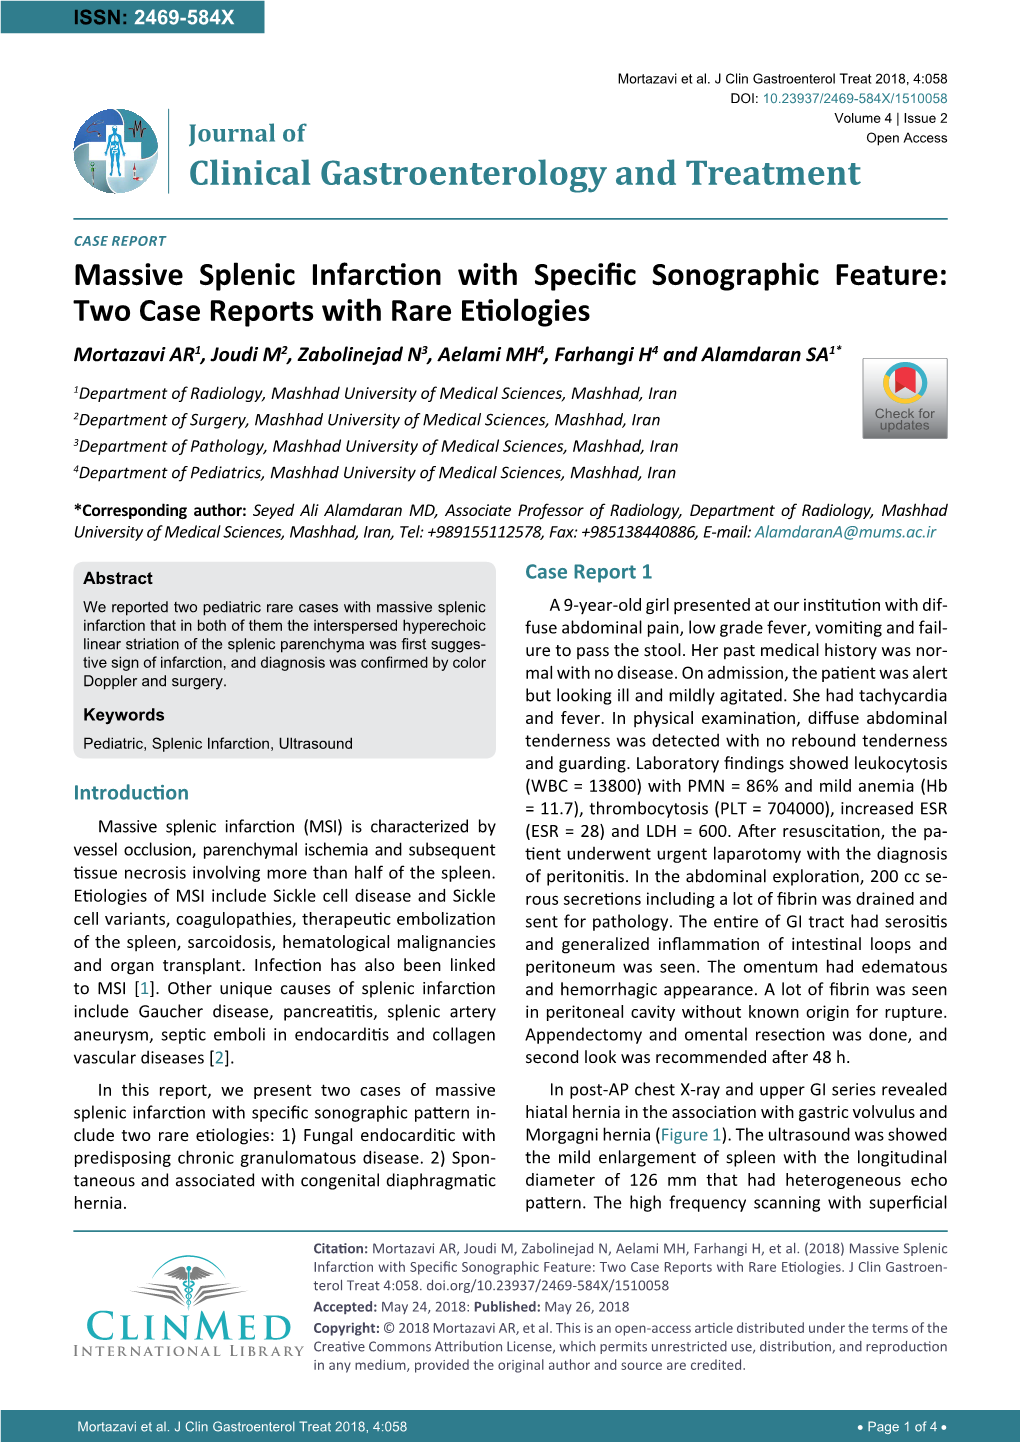 Massive Splenic Infarction with Specific Sonographic Feature: Two